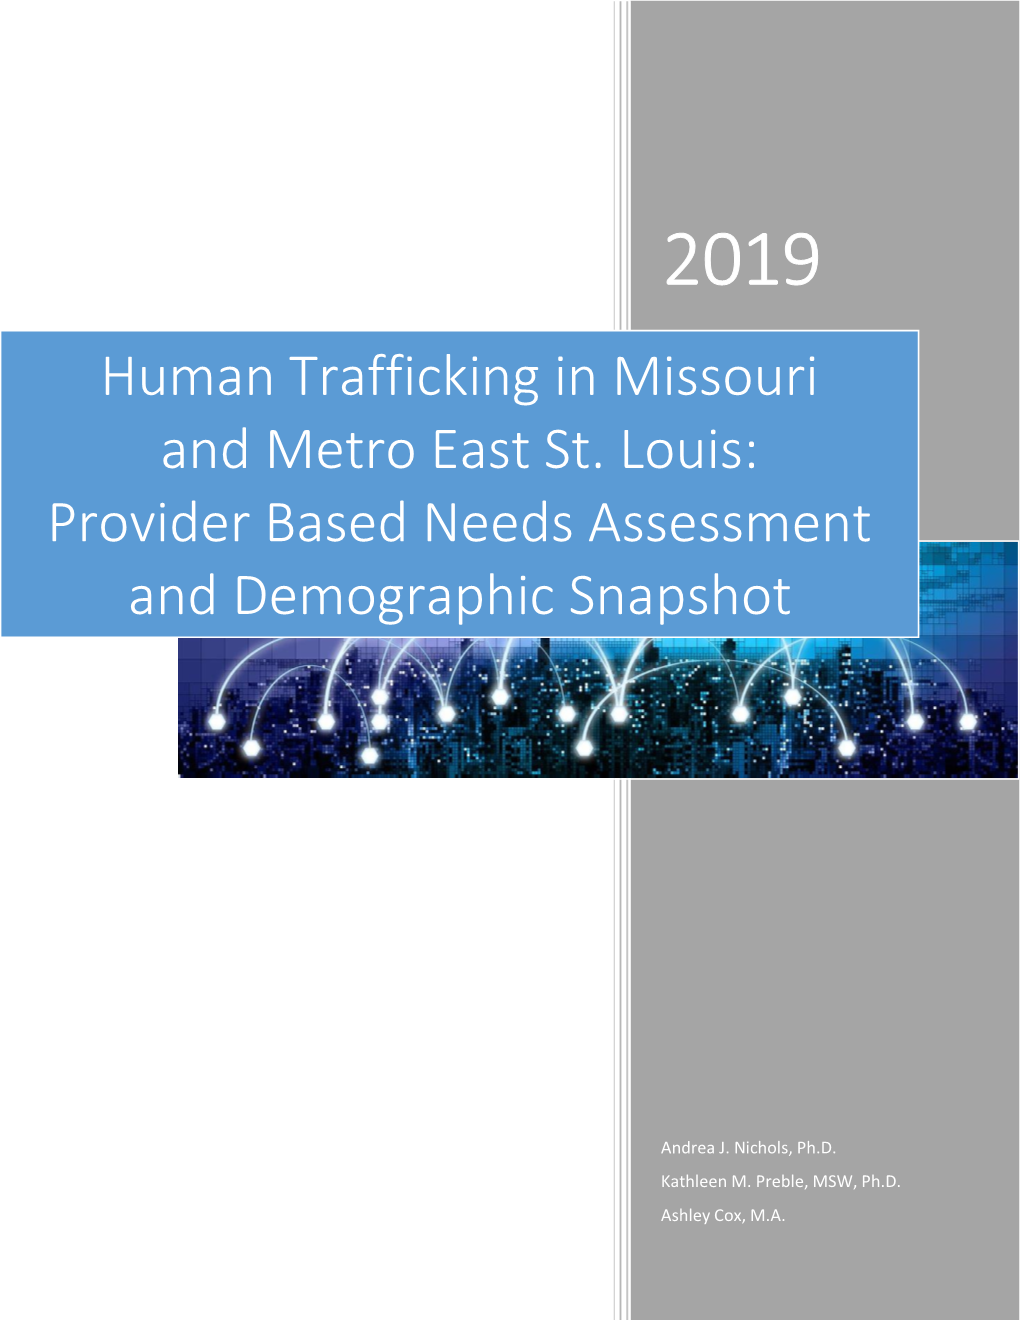 Human Trafficking in Missouri and Metro East St. Louis: Provider Based Needs Assessment and Demographic Snapshot